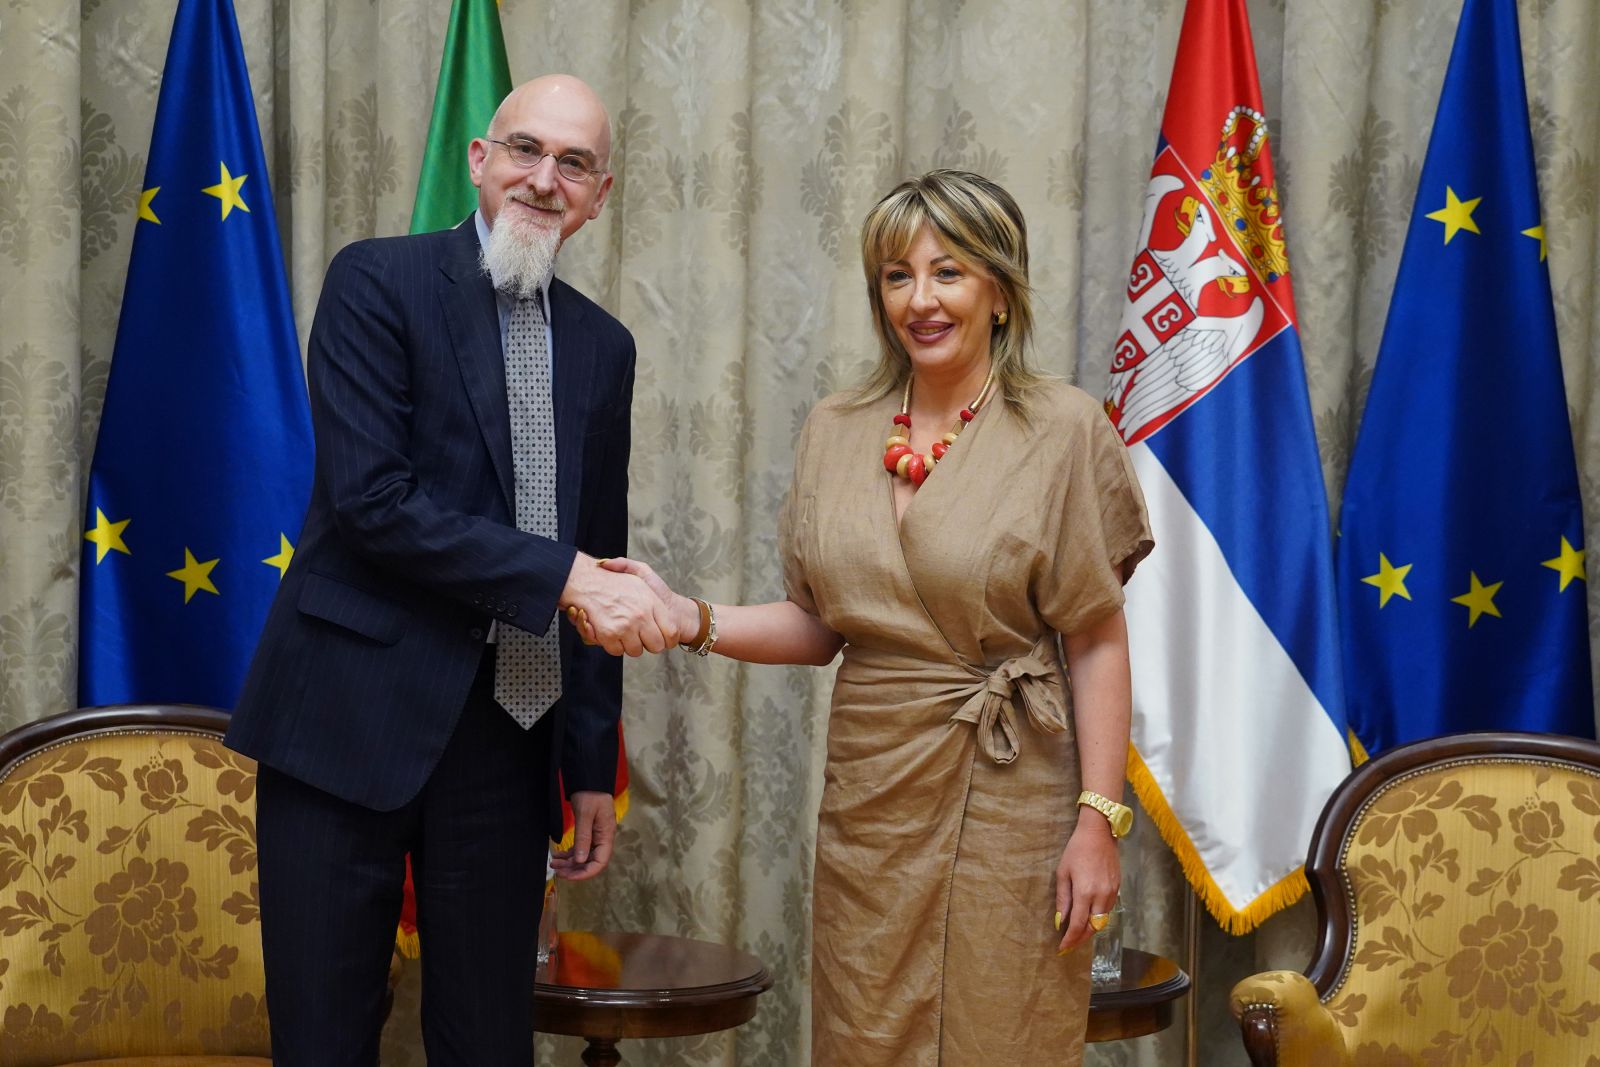 J. Joksimović and Gori: Strengthening cooperation between Serbia and Italy in all areas